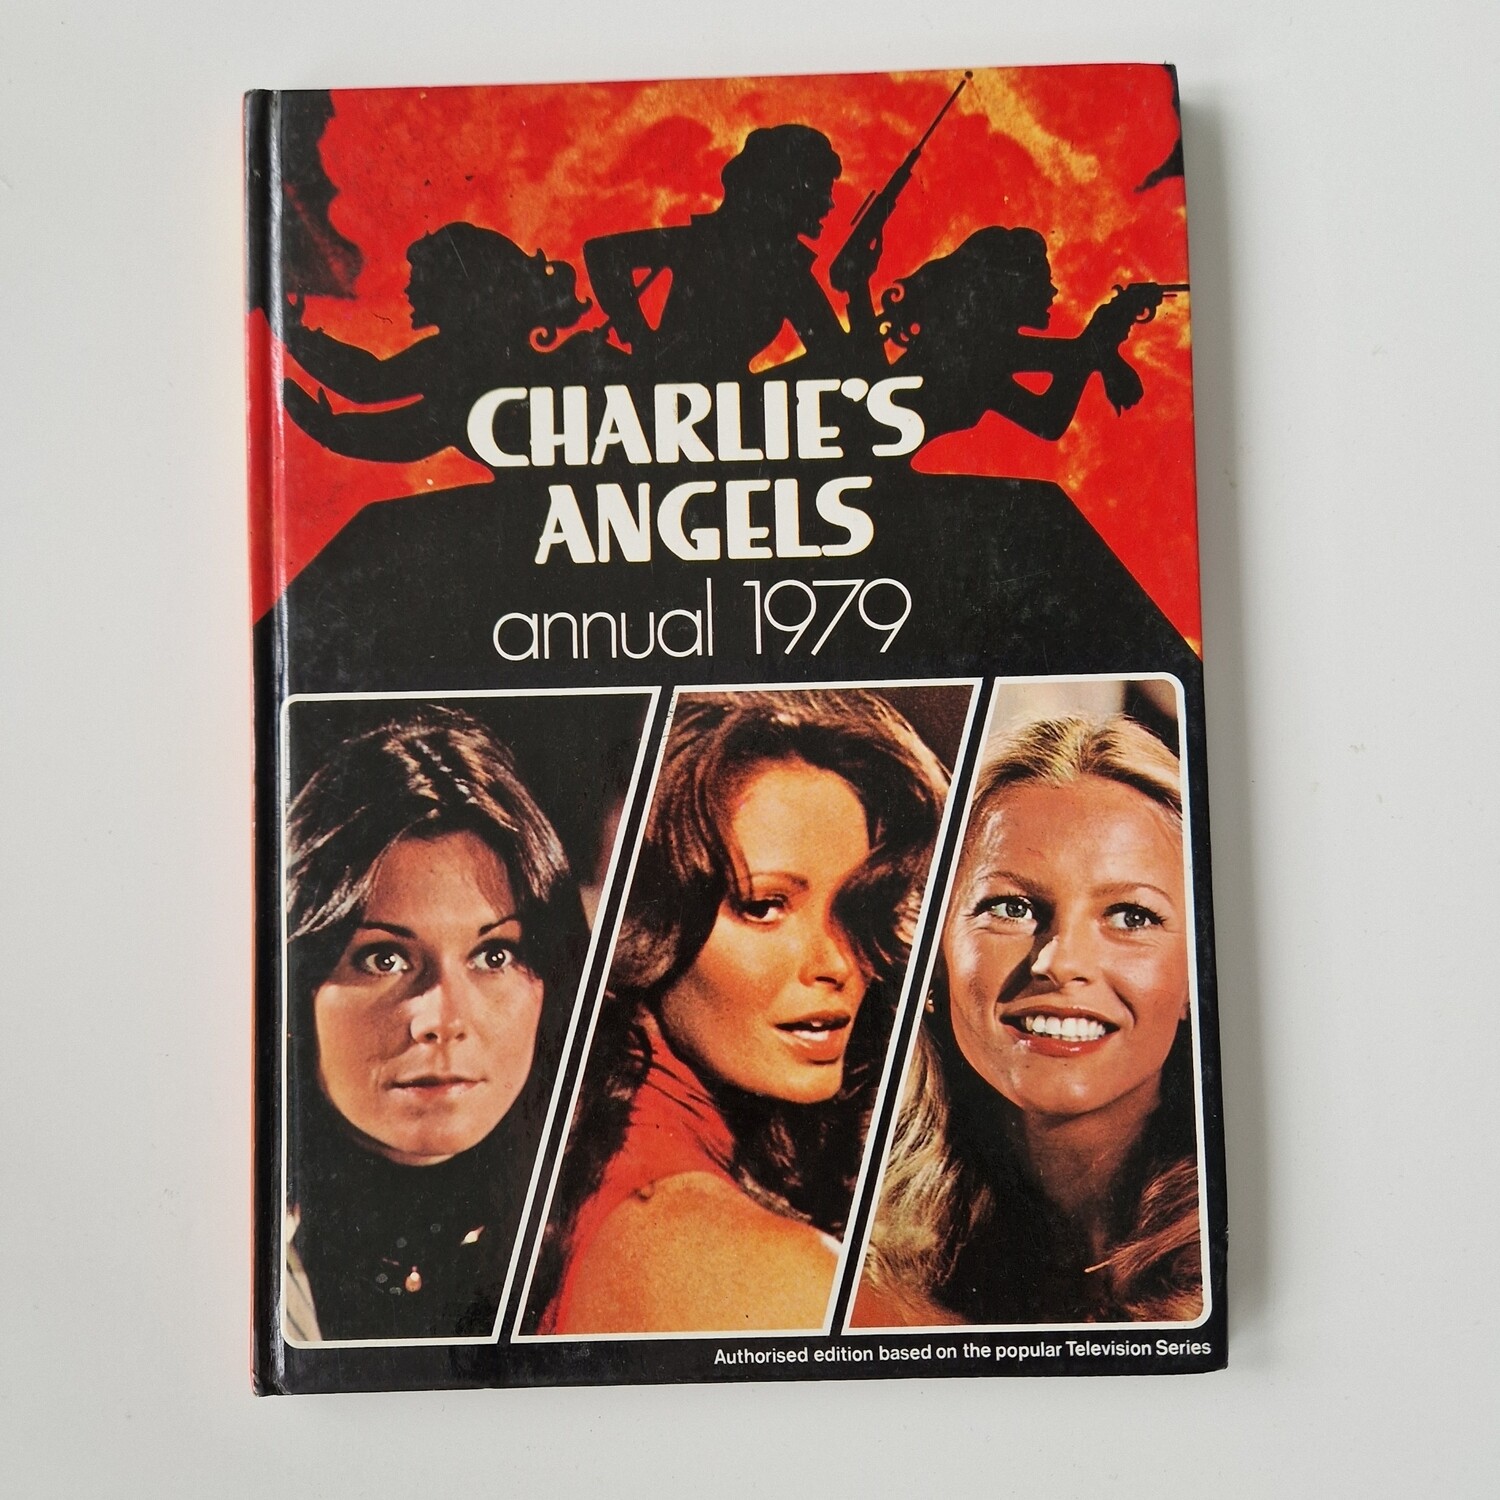 Charlie's Angels Annual 1979